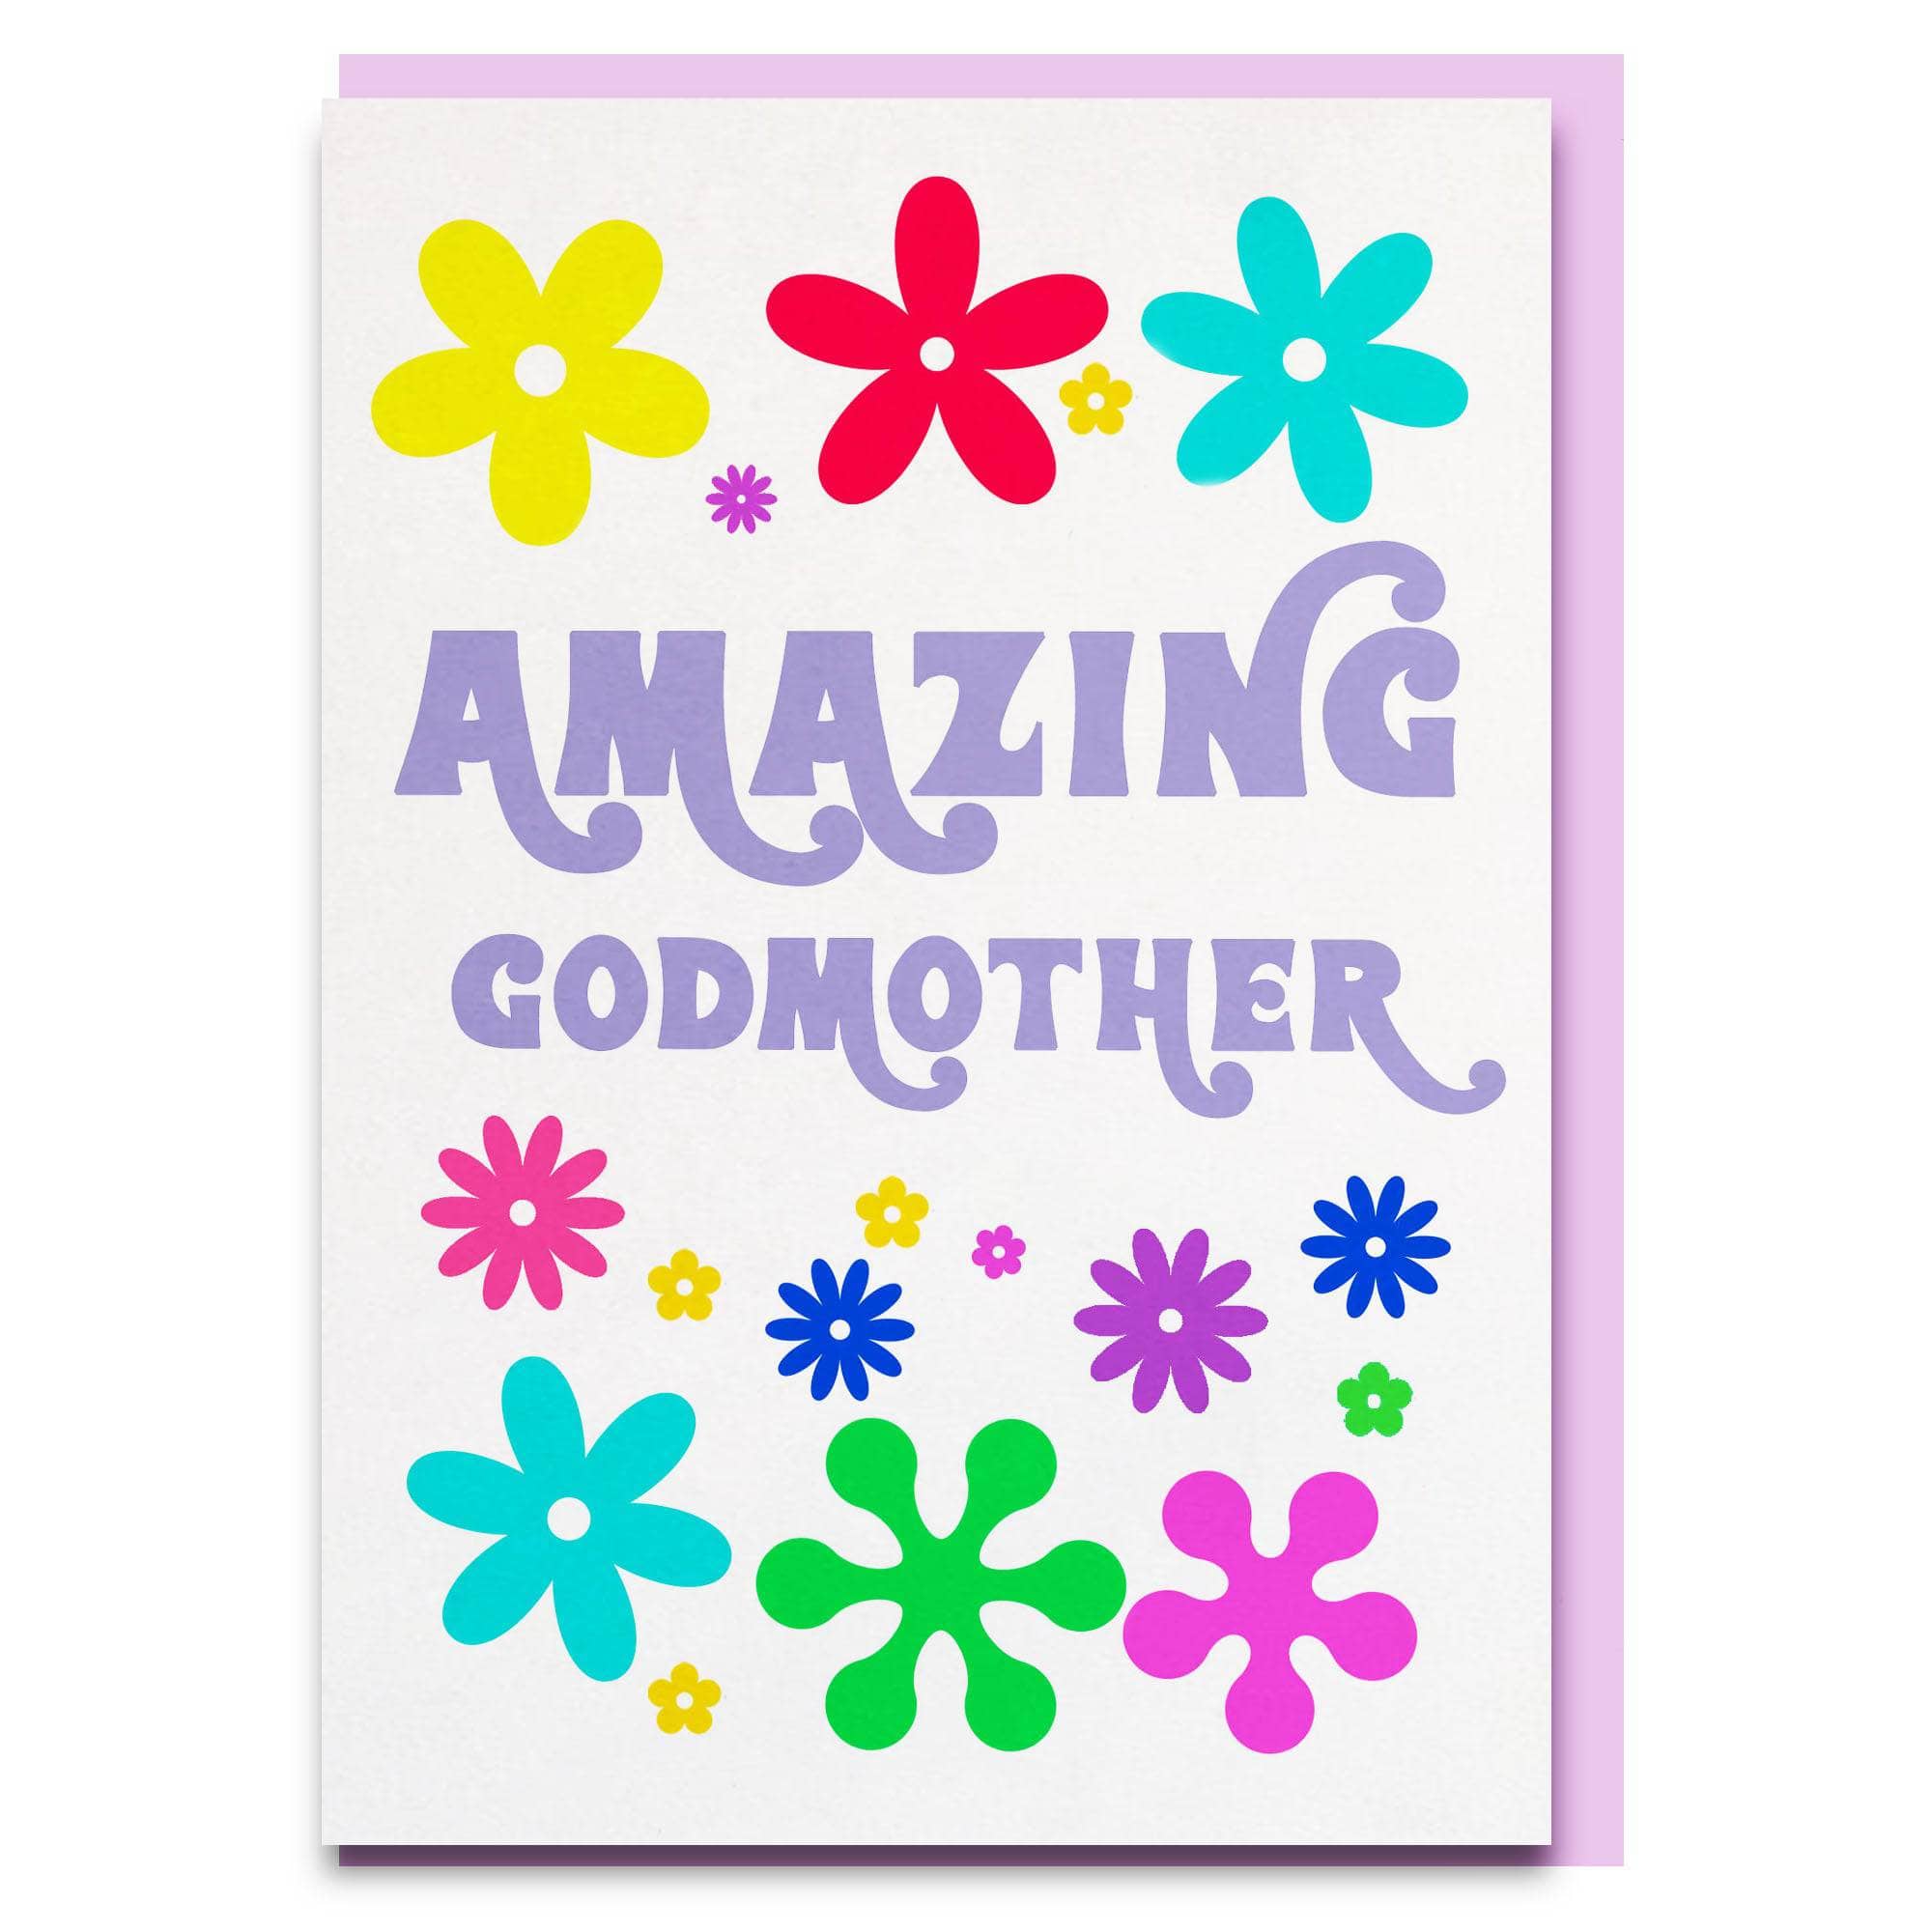 Godmother mother's day card